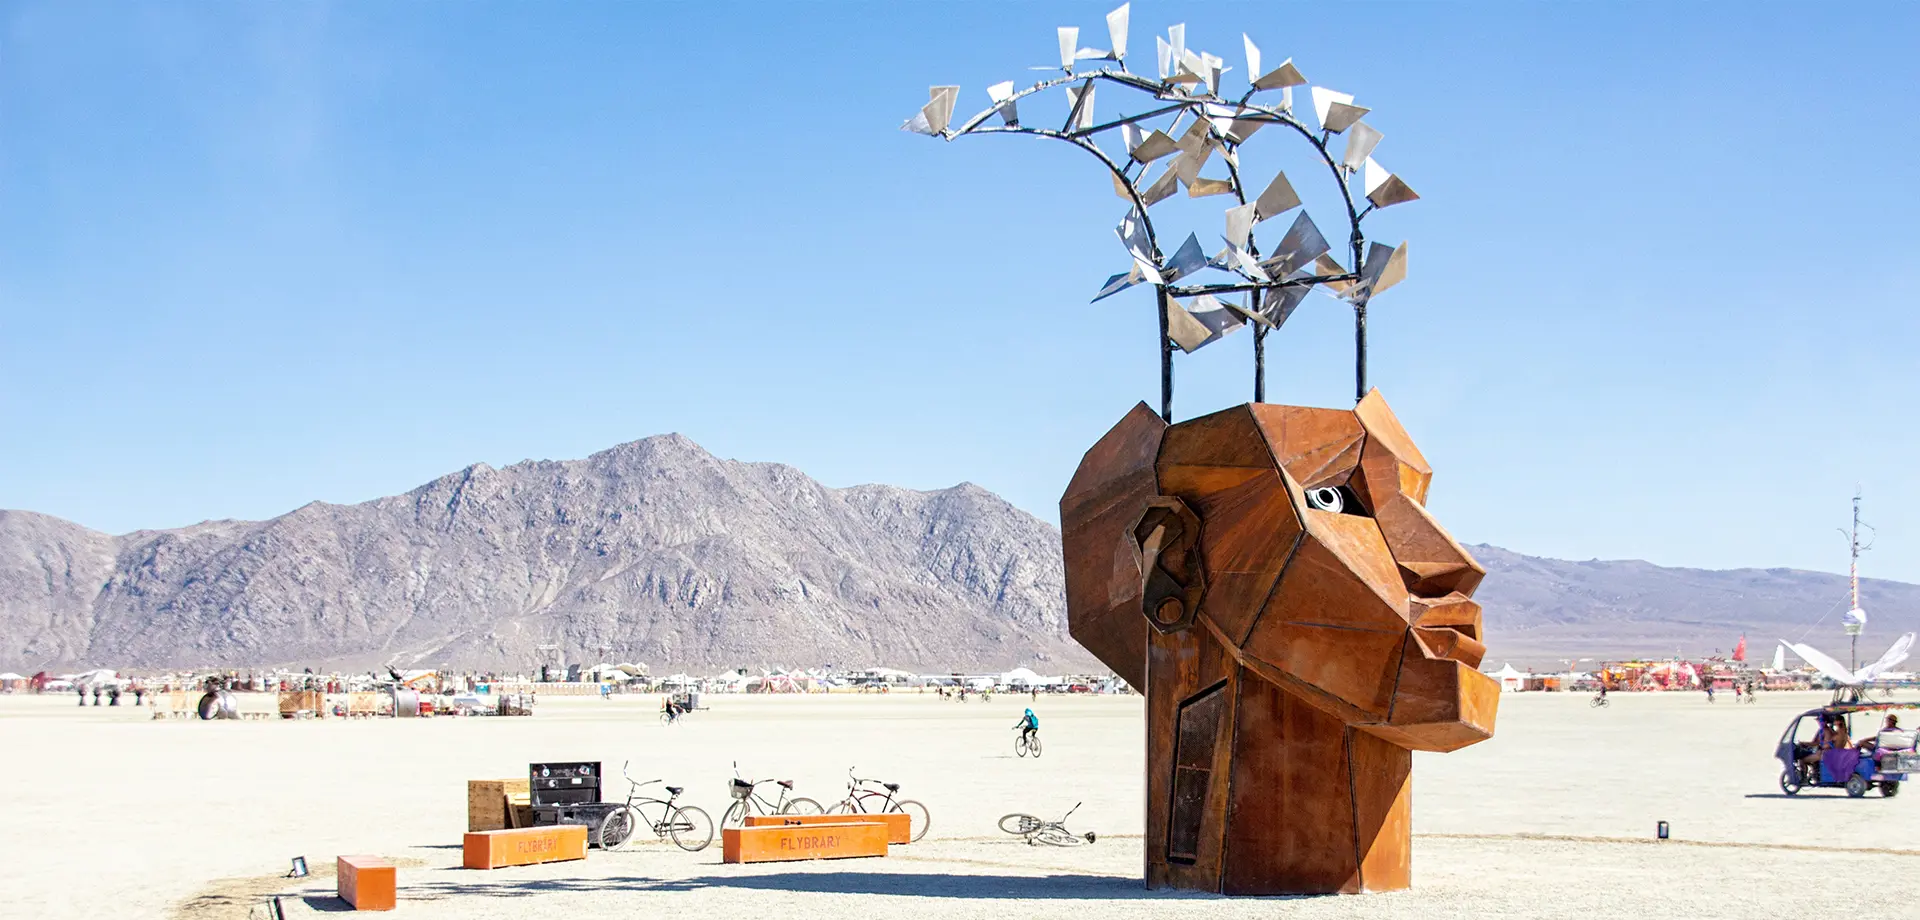 Huge sculptures from Burning Man, held in Nevada’s Black Rock Desert, USA will be making their UK debut at Chatsworth this spring at an ambitious and free-to-access exhibition in the Derbyshire estate’s parkland, it has been announced today (10 Feb 2022).